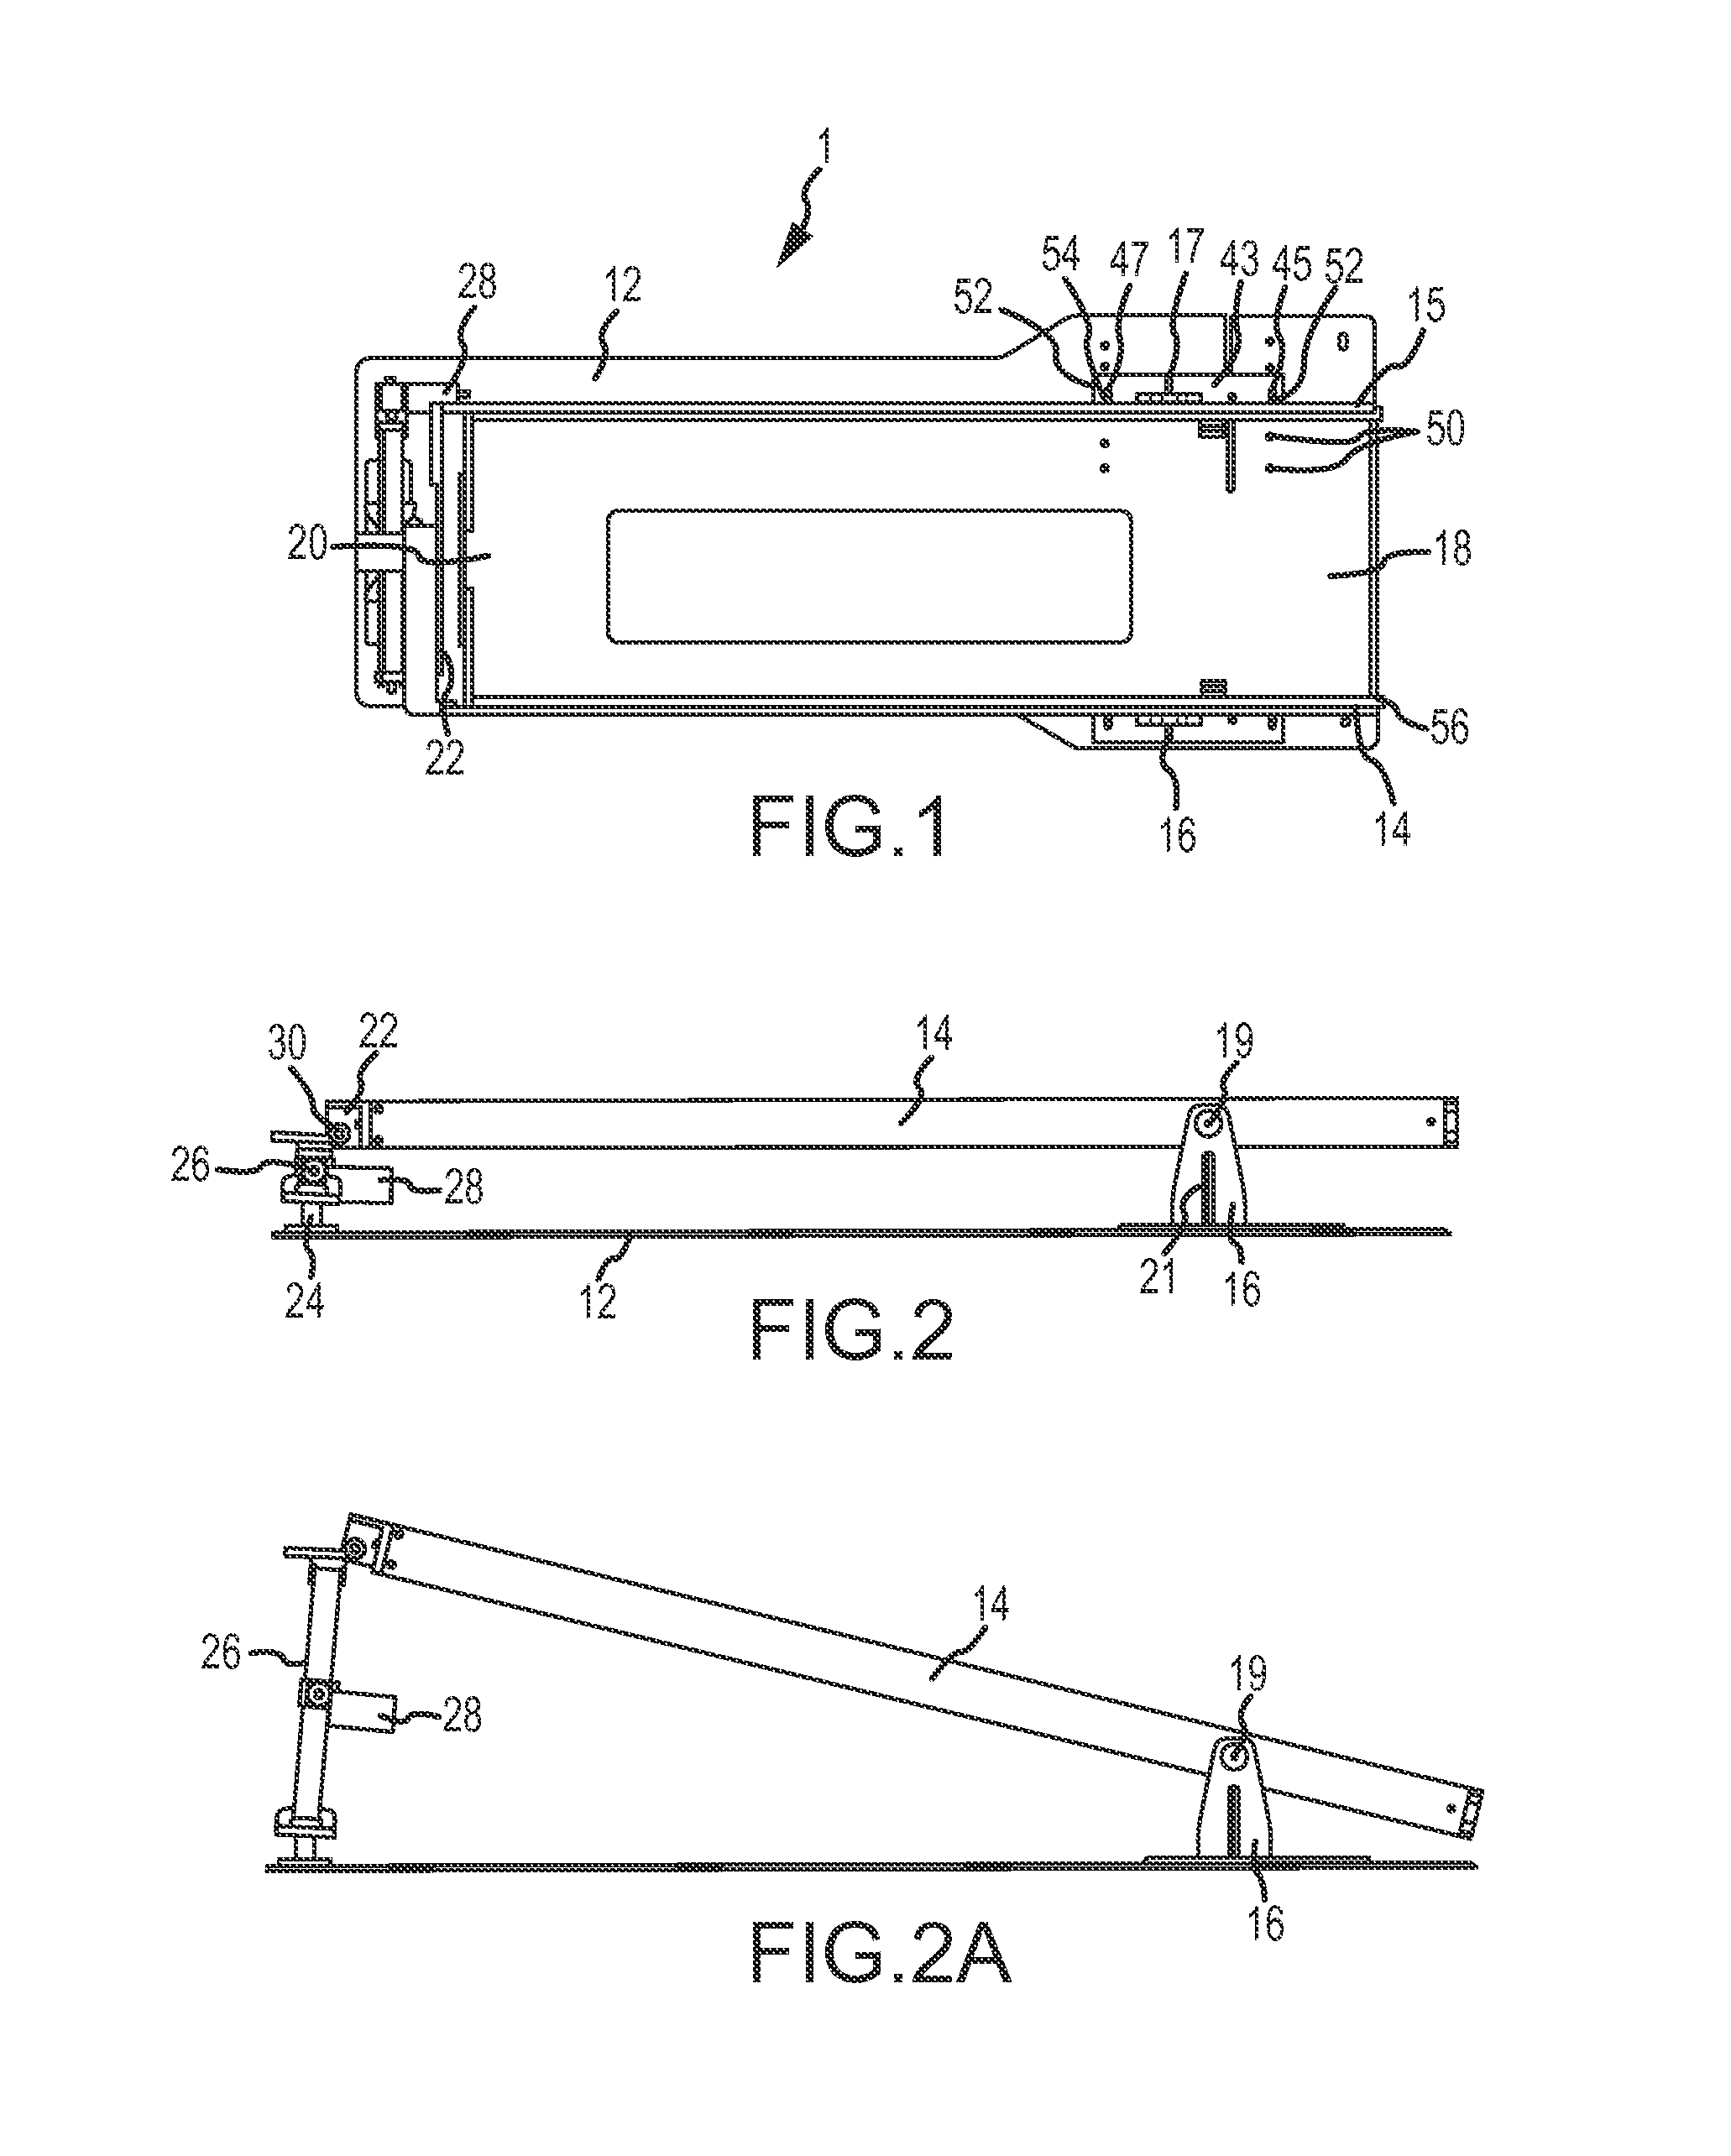 System and method for transferring a wheeled load into a transport vehicle